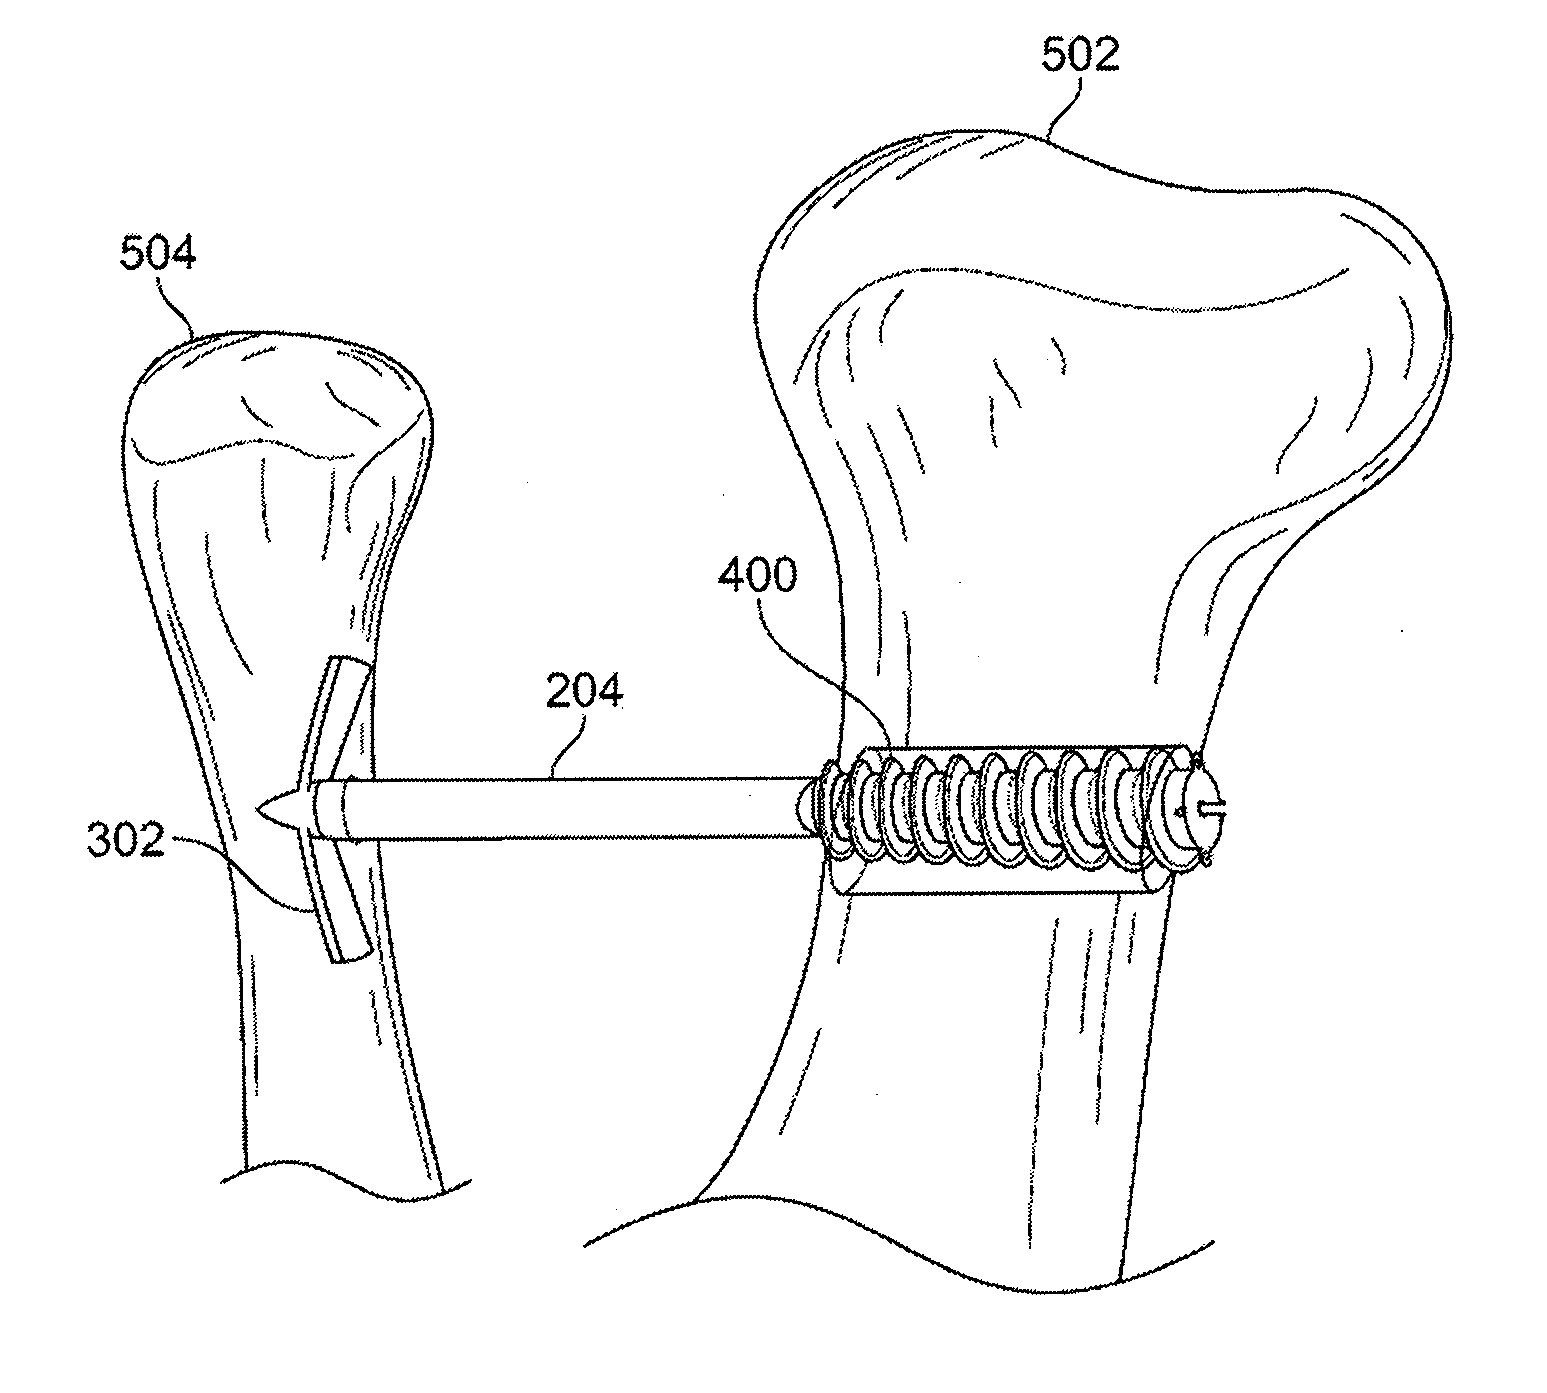 Fixation and alignment device and method used in orthopaedic surgery